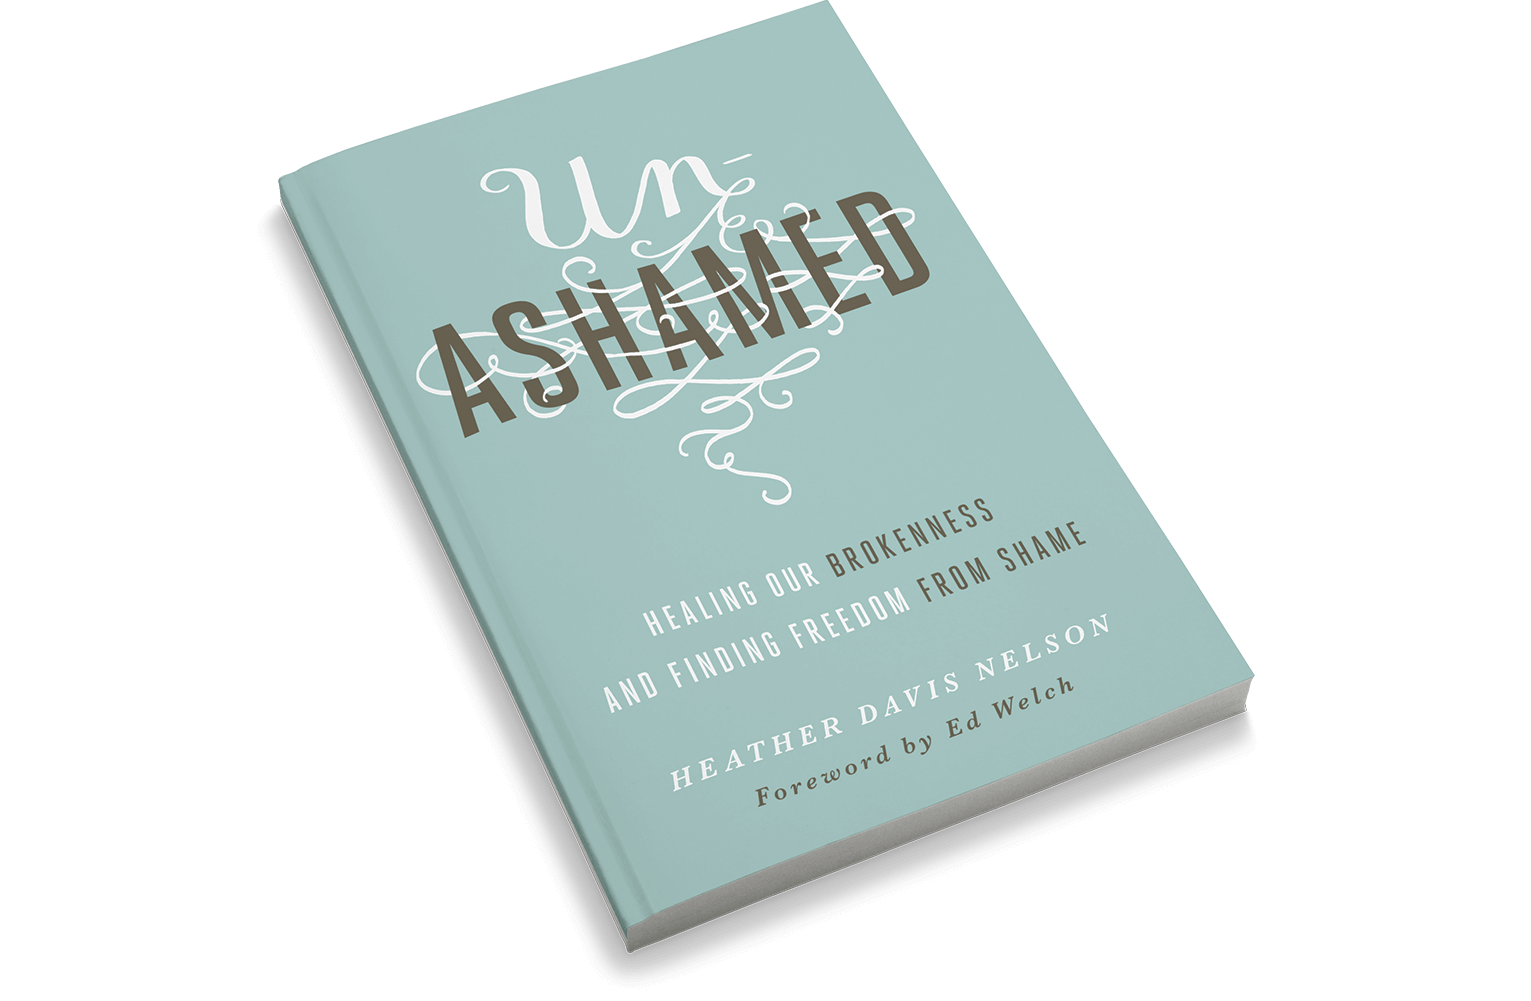 Unashamed: Healing Our Brokenness and Finding Freedom From Shame